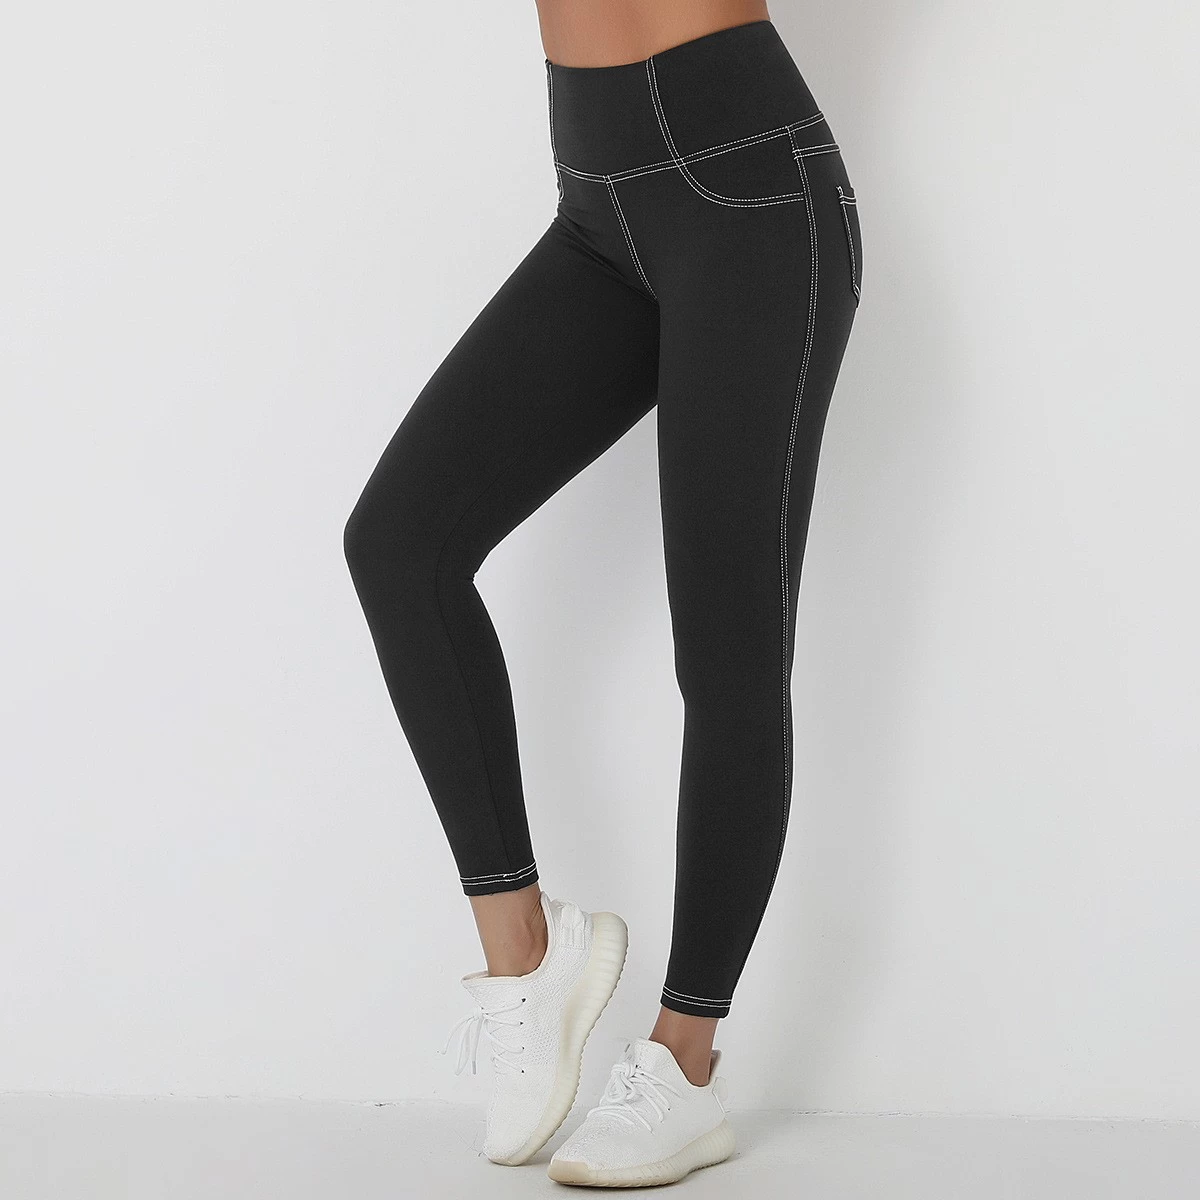 S-SHAPER Seamless High Waist Imitate Jeans Print Leggings Push Up Fashion Pants for Women Athleisure Nudity Fitness Yoga Leggings With pockets